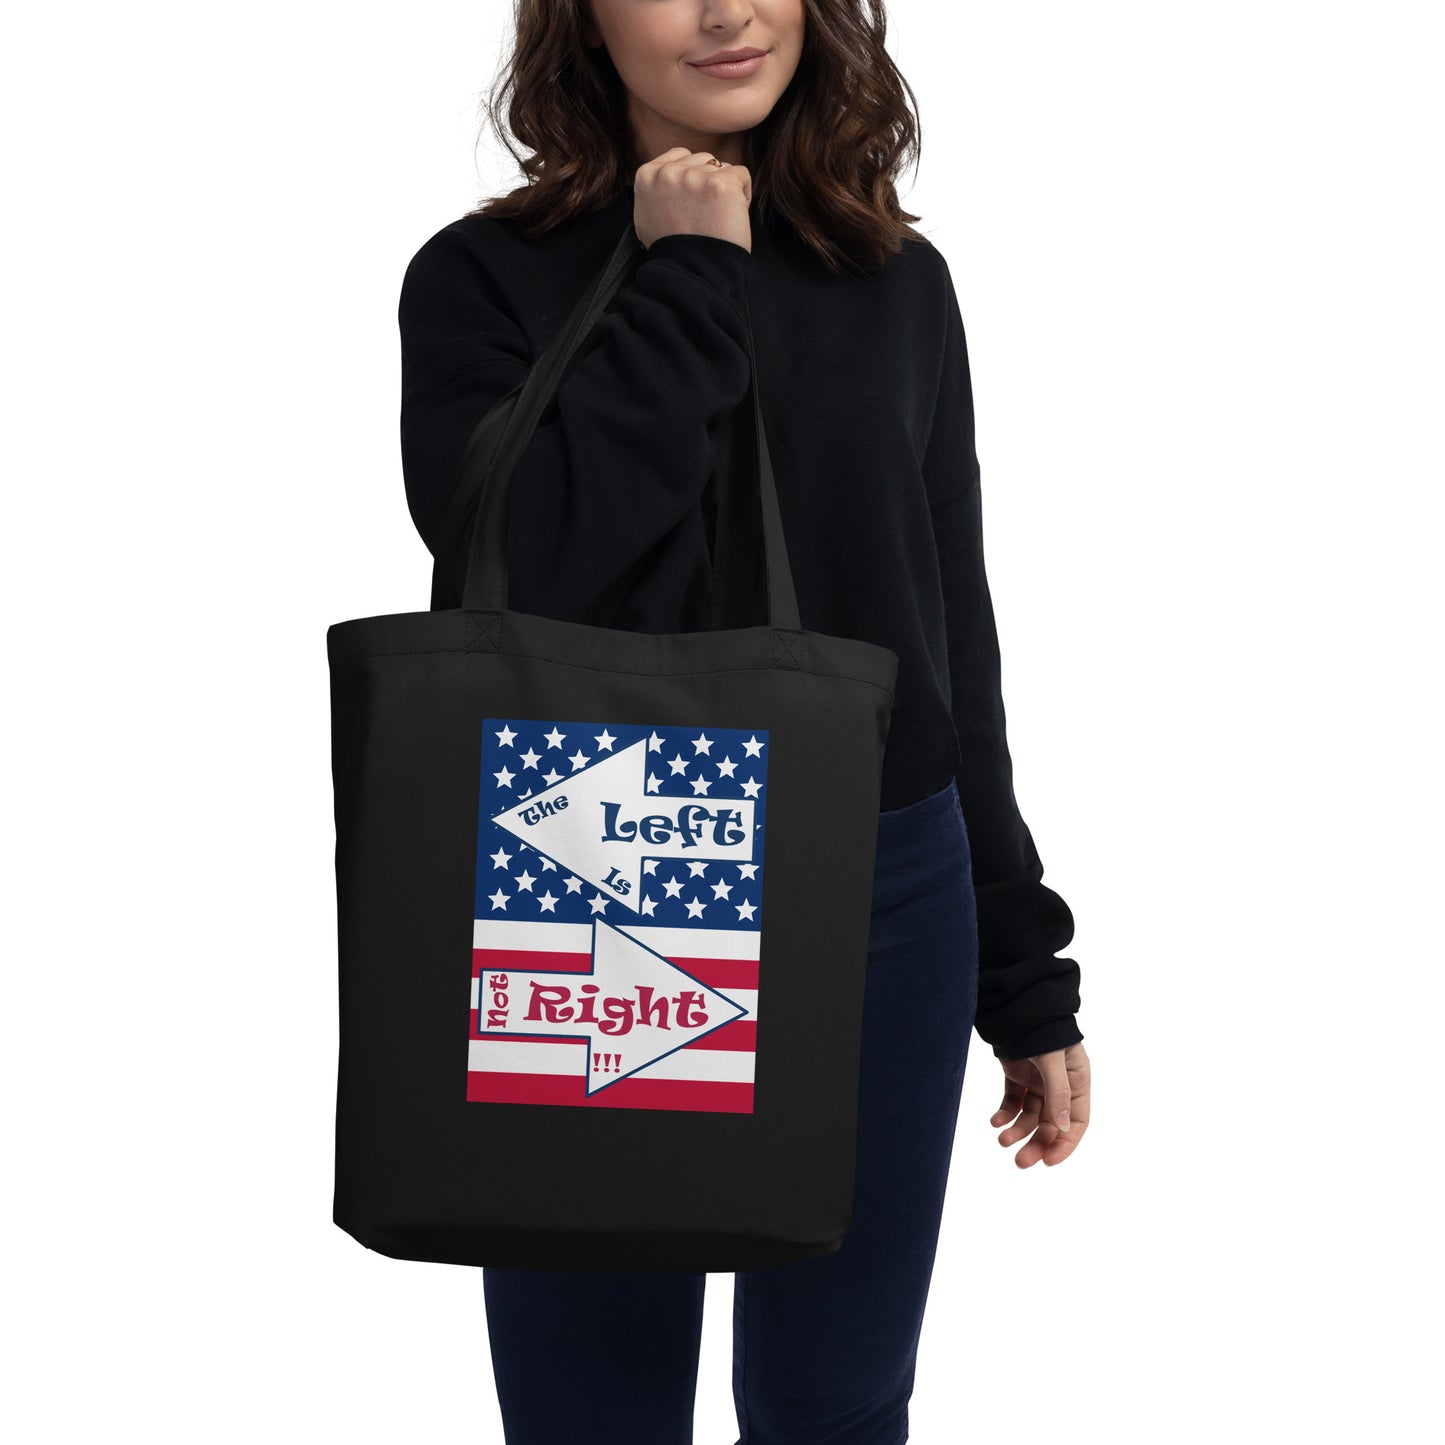 A017 Tote – Eco Tote Bag Featuring the Stars and Stripes of the U S Flag with the Text “The Left Is Not Right.”